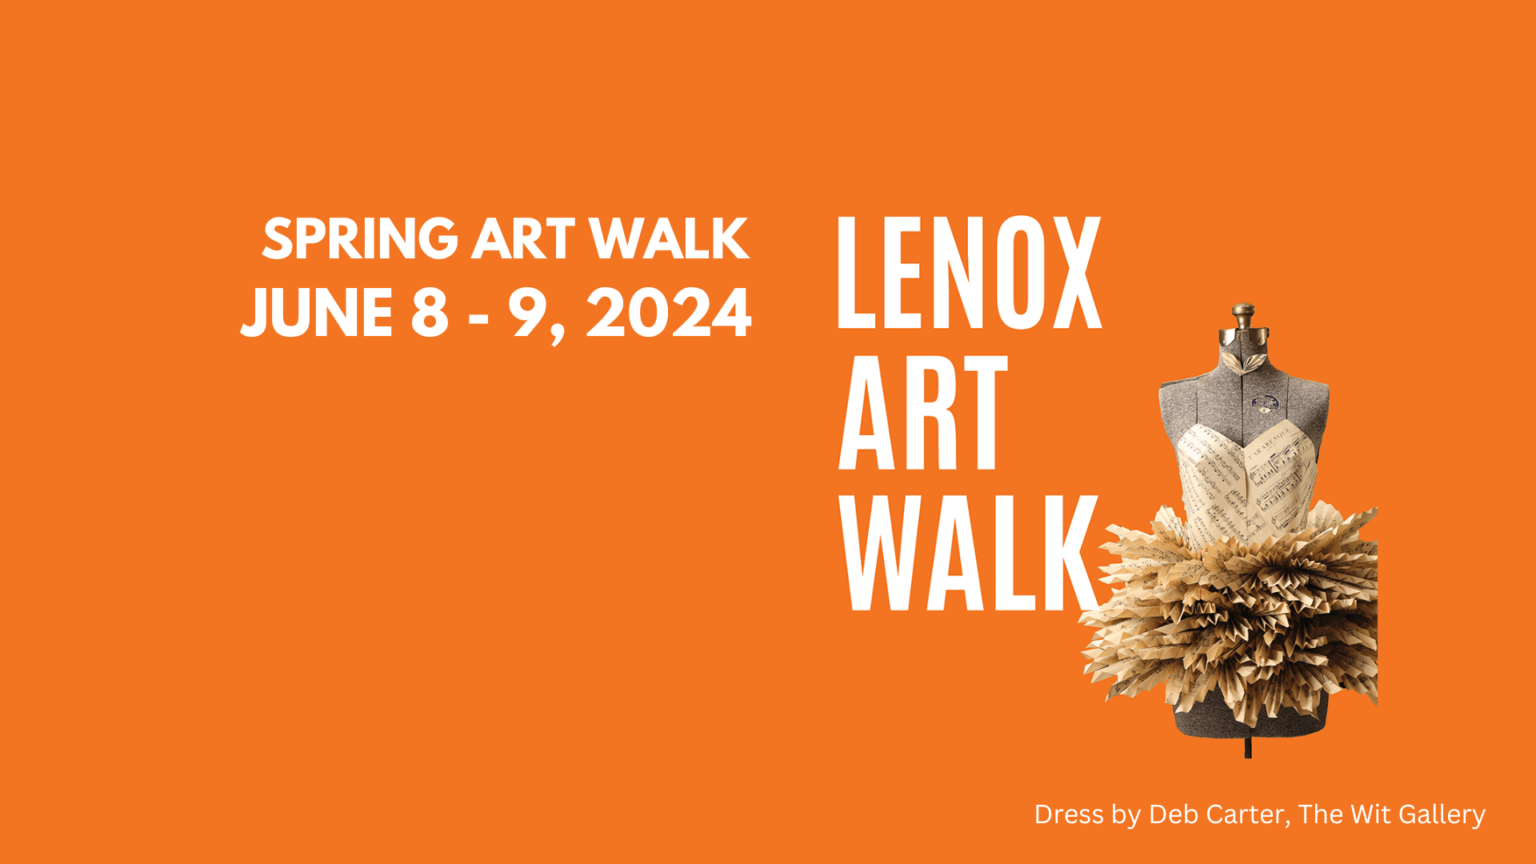 Get ready for the Lenox Spring Art Walk